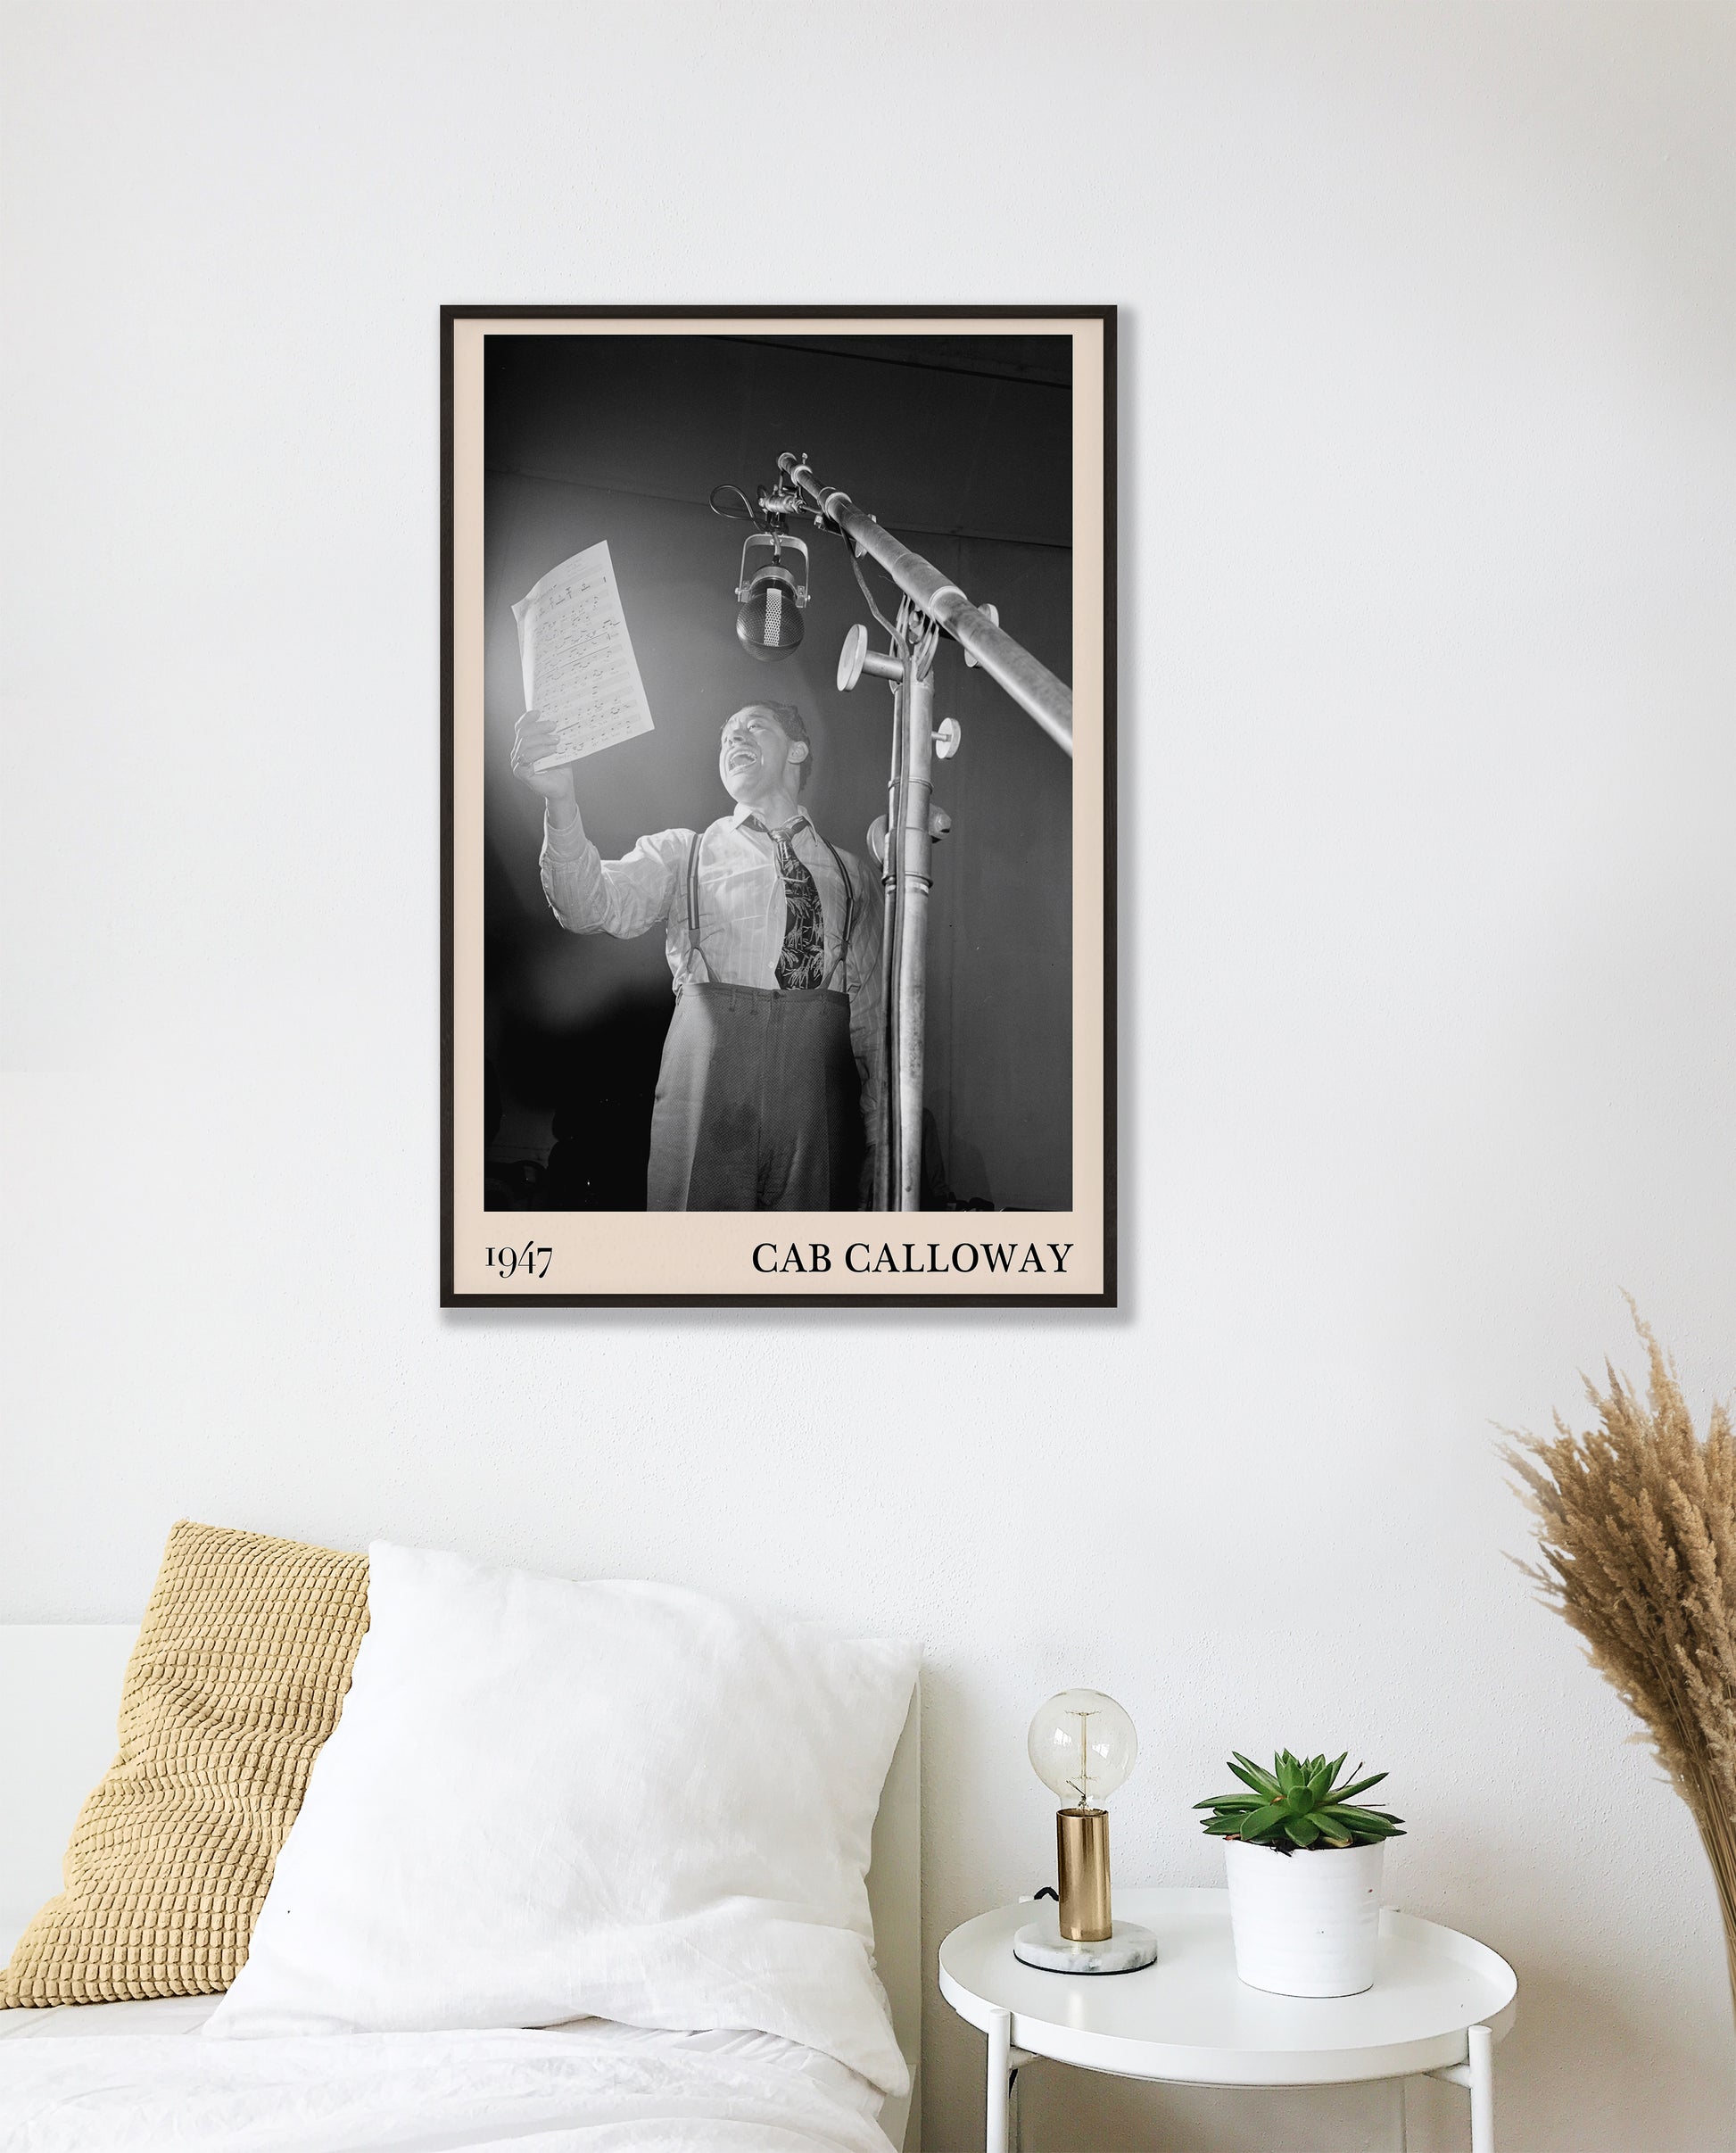 Retro 1947 photo of Cab Calloway crafted into  black framed print, hanging on a bedroom wall